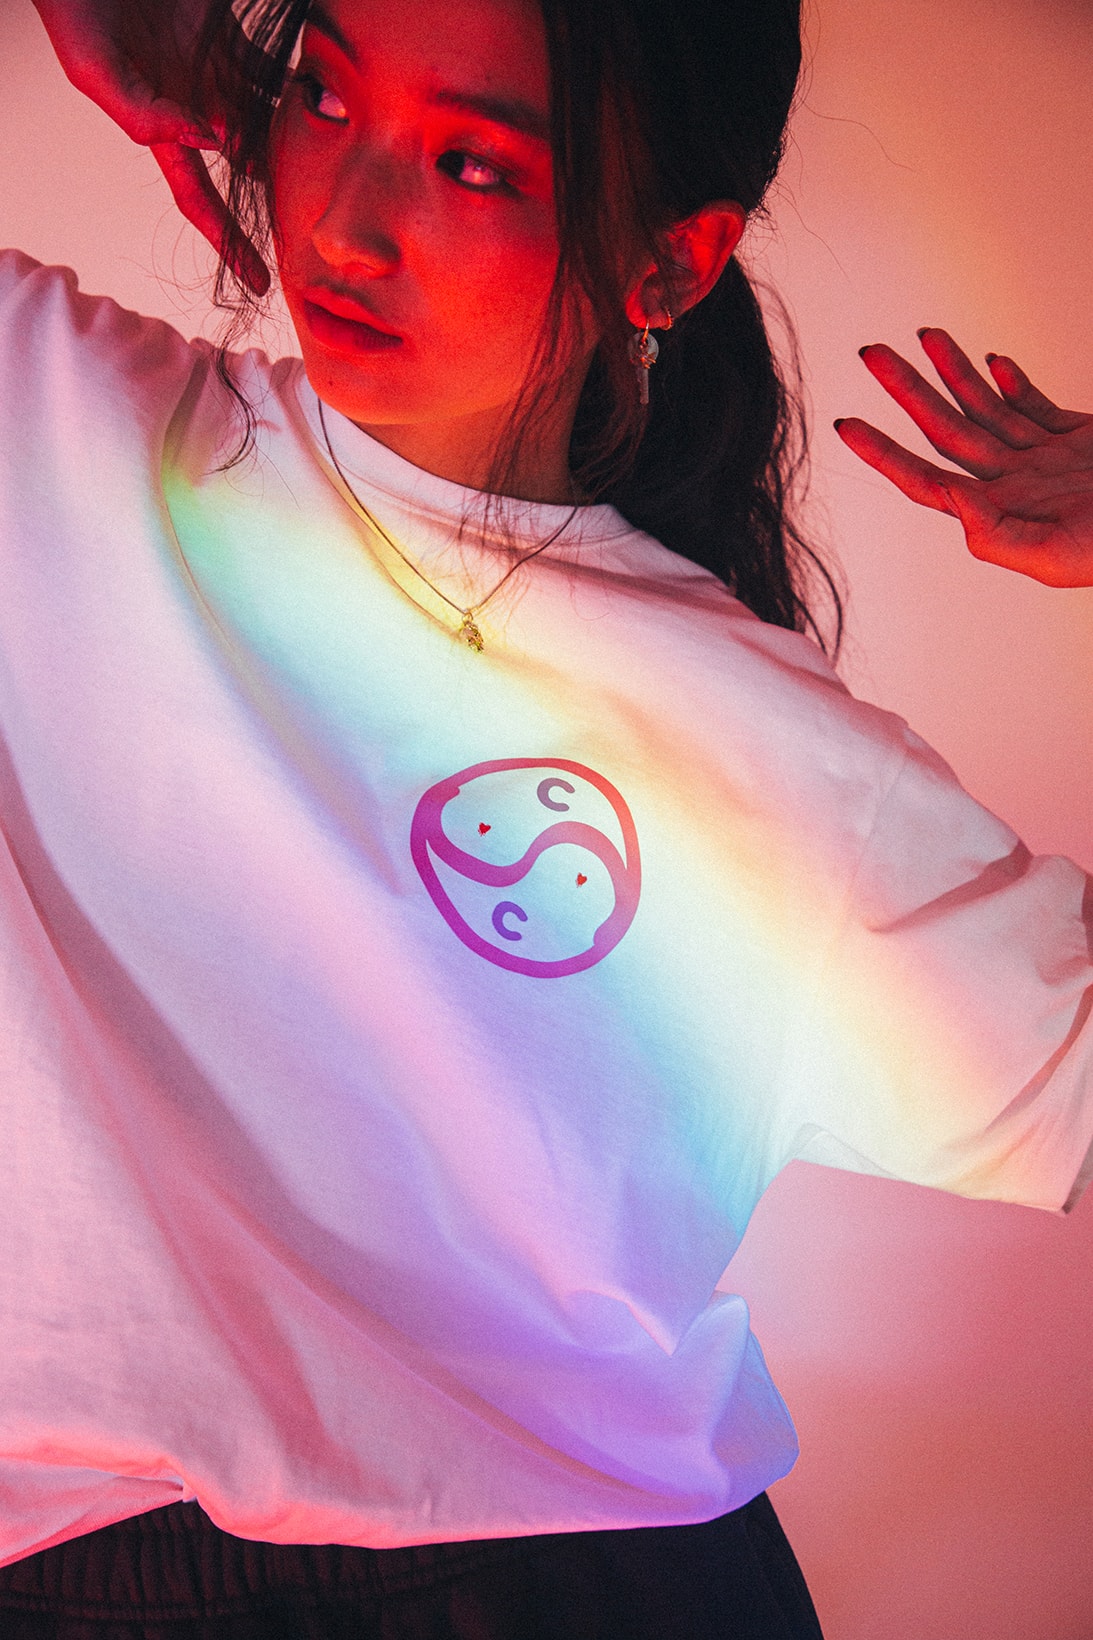 clot emotionally unavailable crazysexycool collaboration white tee